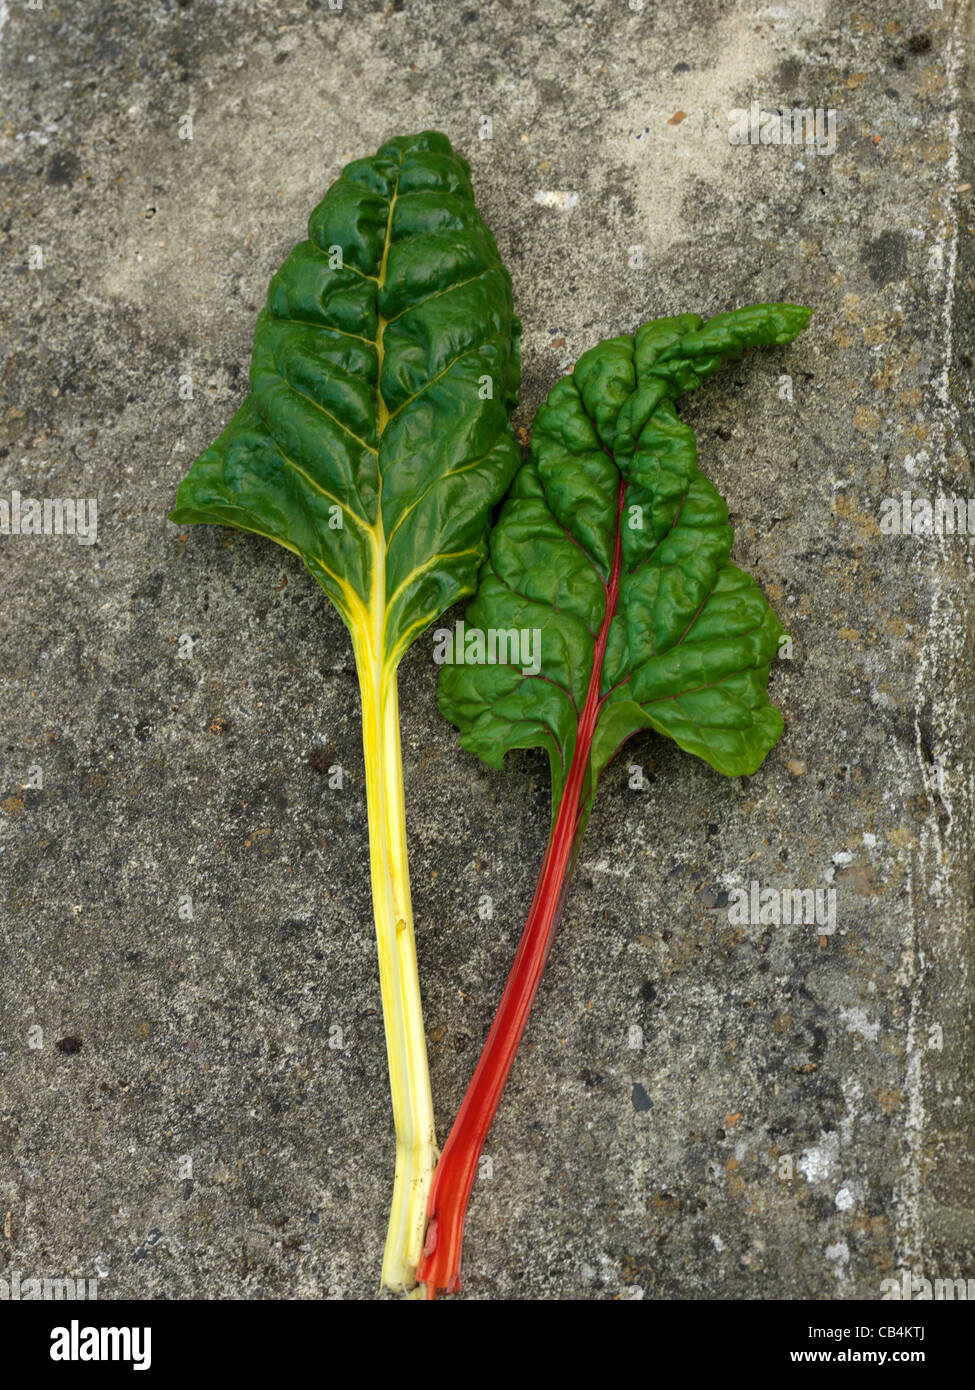 200 seeds spinach beet or chard blite cote bette in melange yellow red white rose